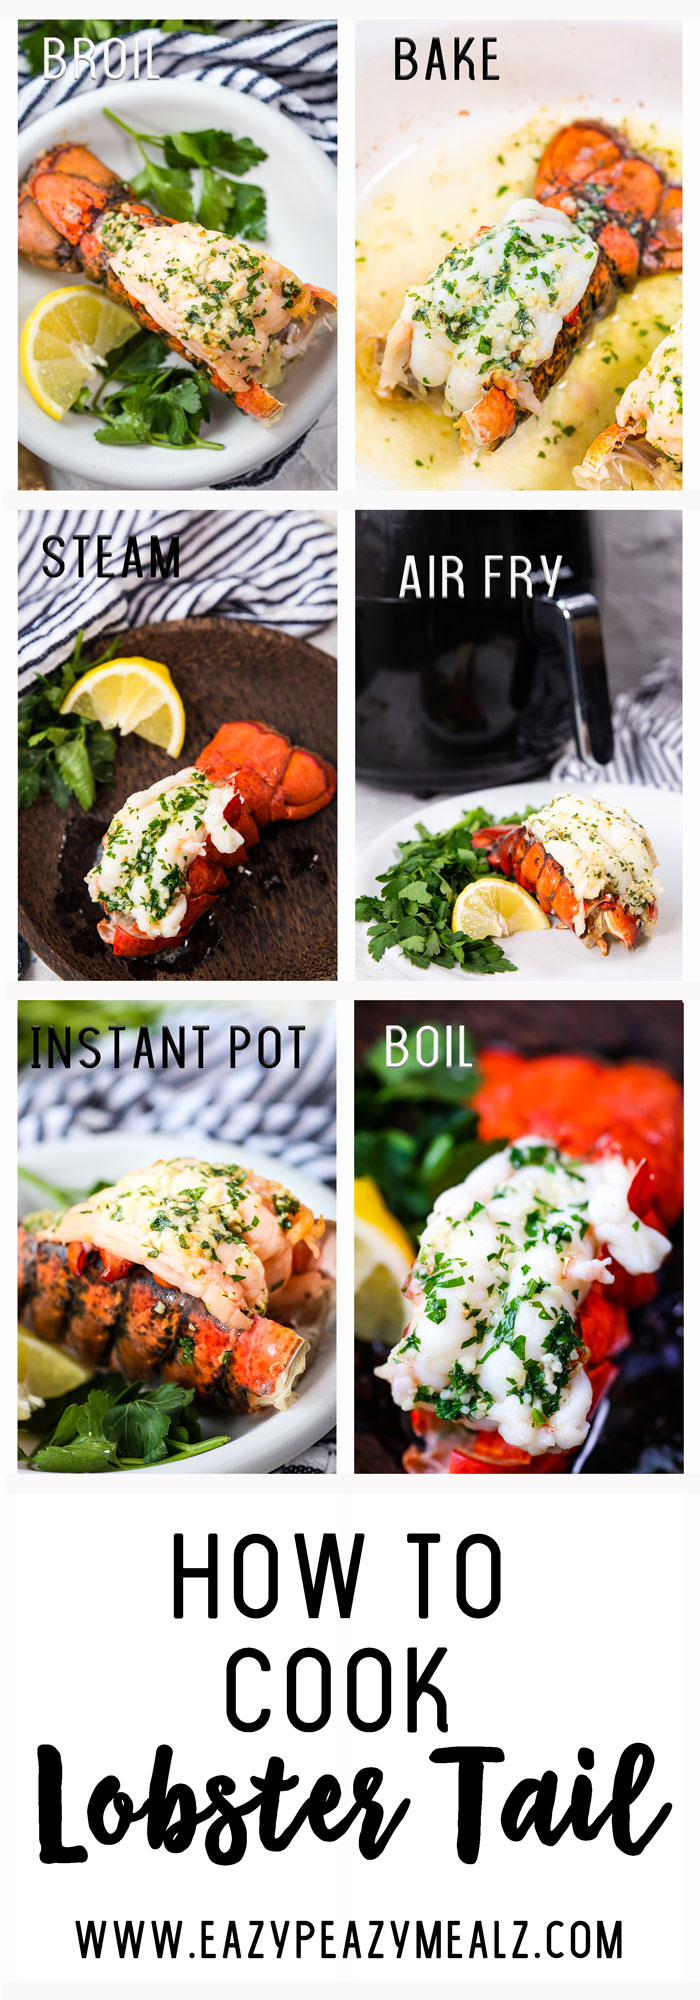 https://www.eazypeazymealz.com/wp-content/uploads/2019/02/How-to-Cook-Lobster-Tail-PIN.jpg